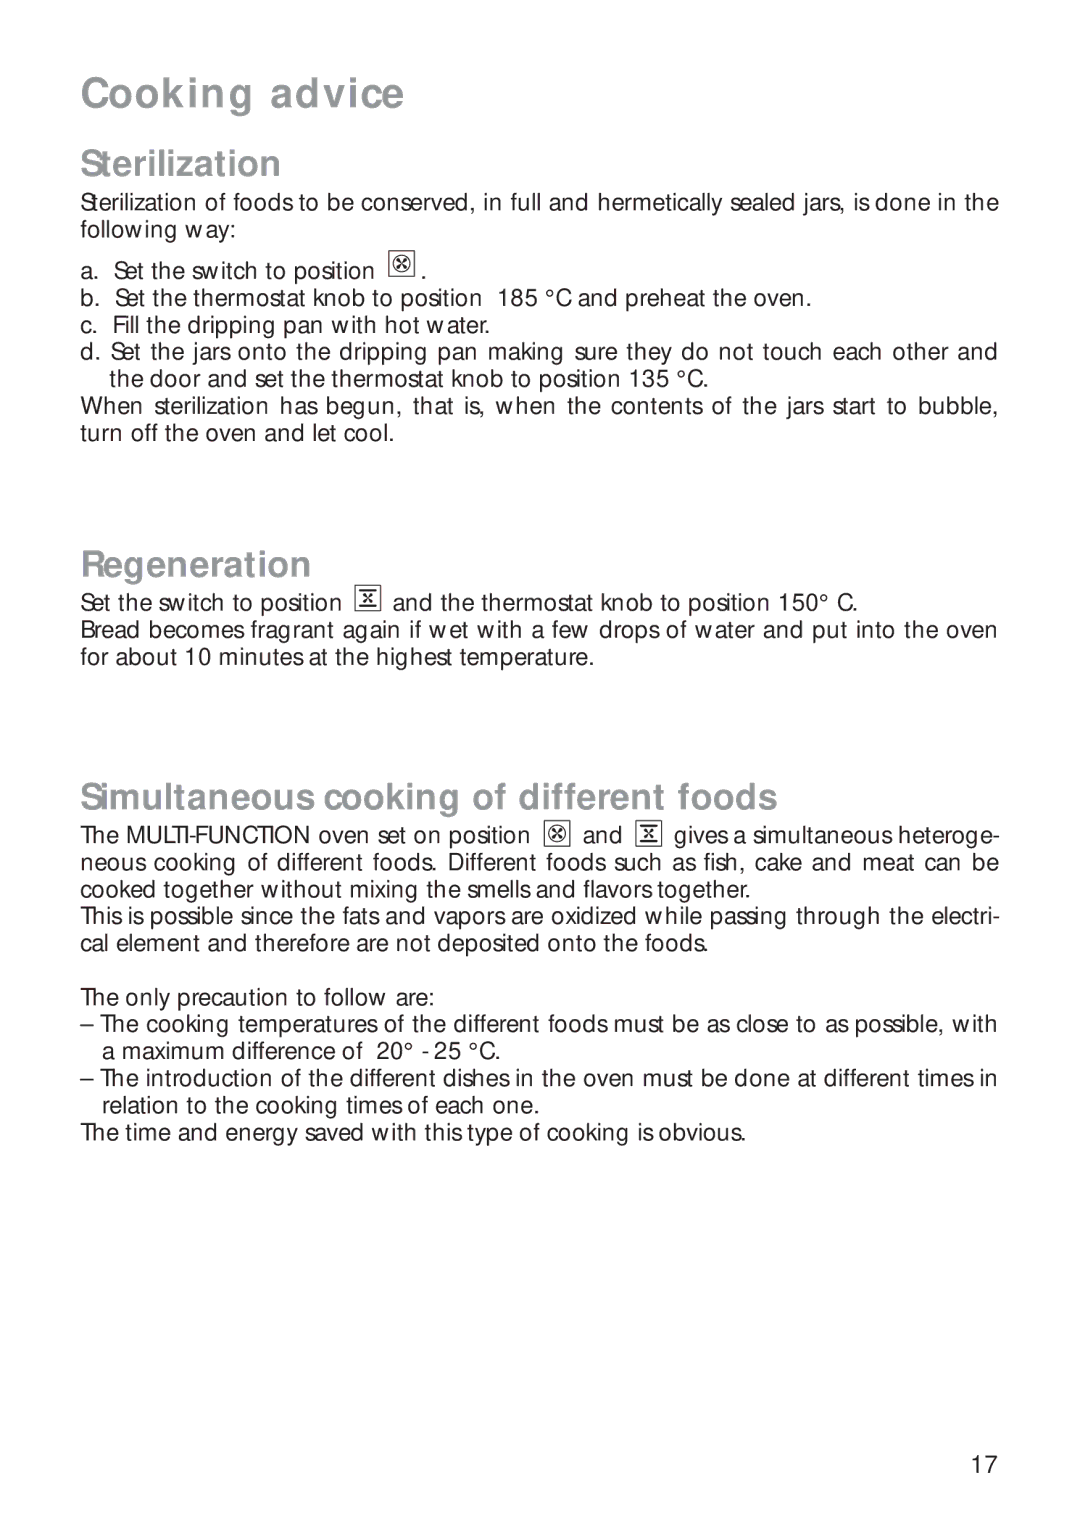 CDA RC 9020 installation instructions Sterilization, Regeneration, Simultaneous cooking of different foods 